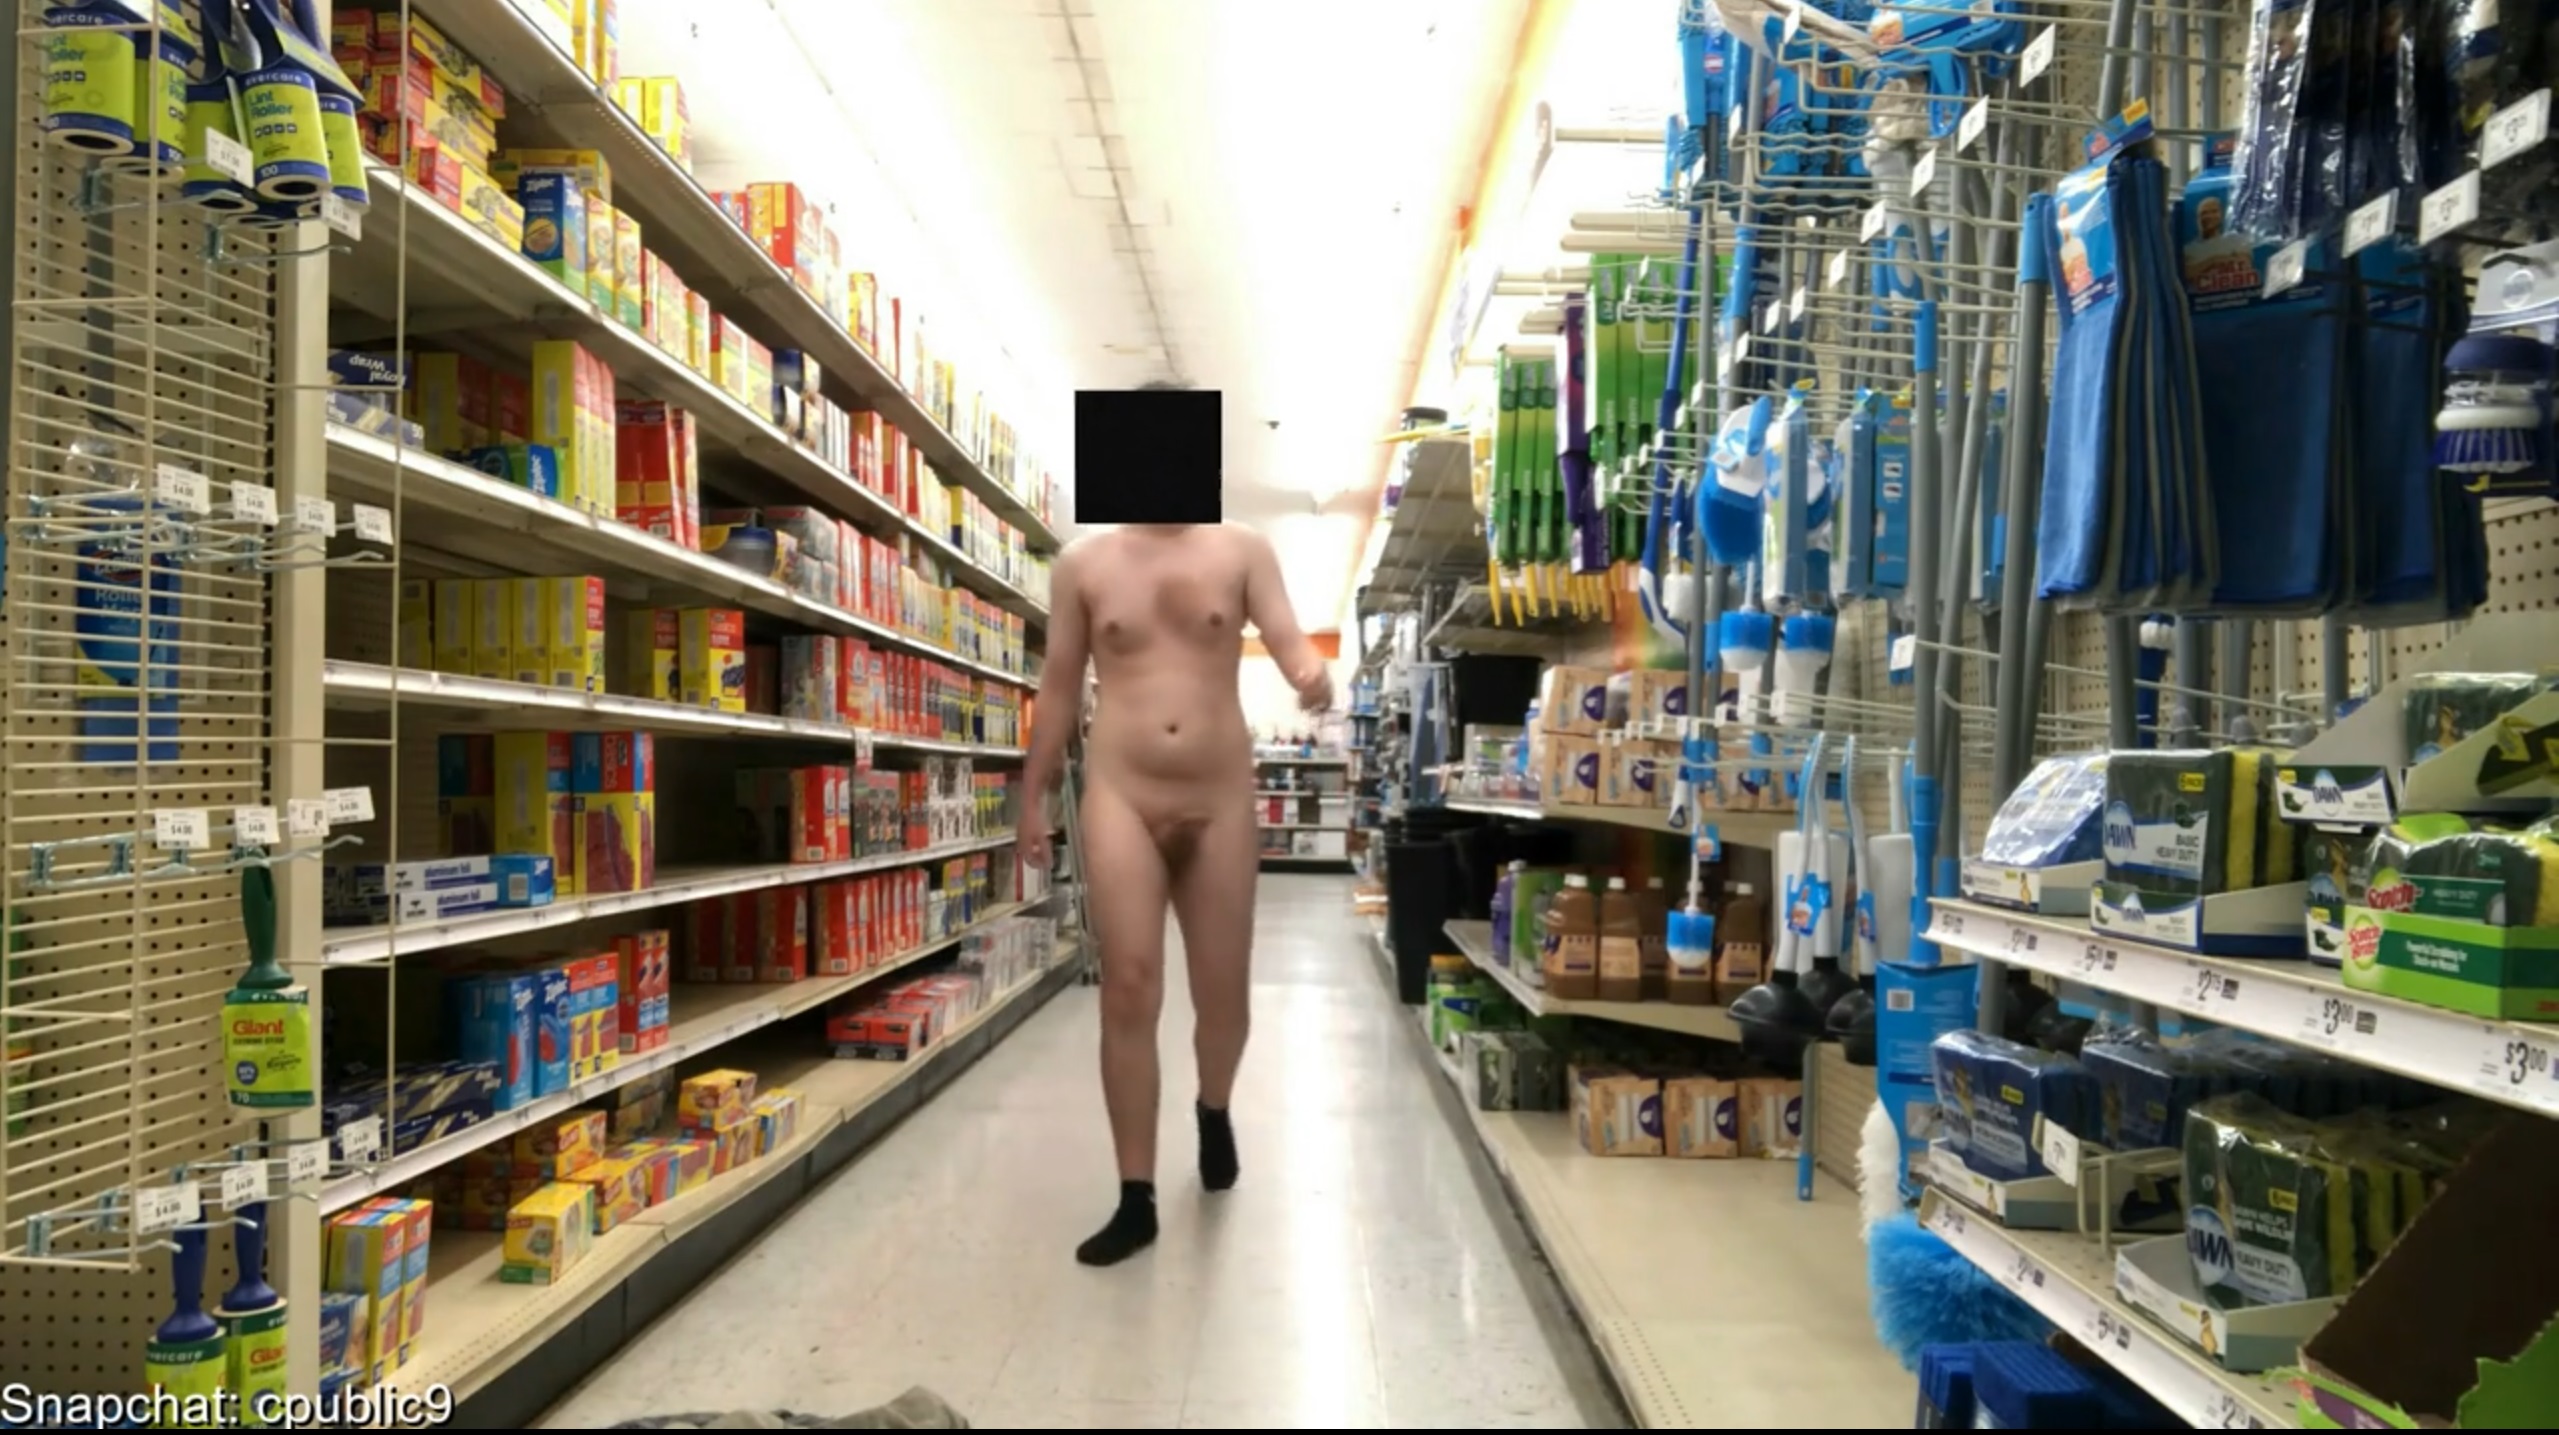 flashing people and cuming in a store